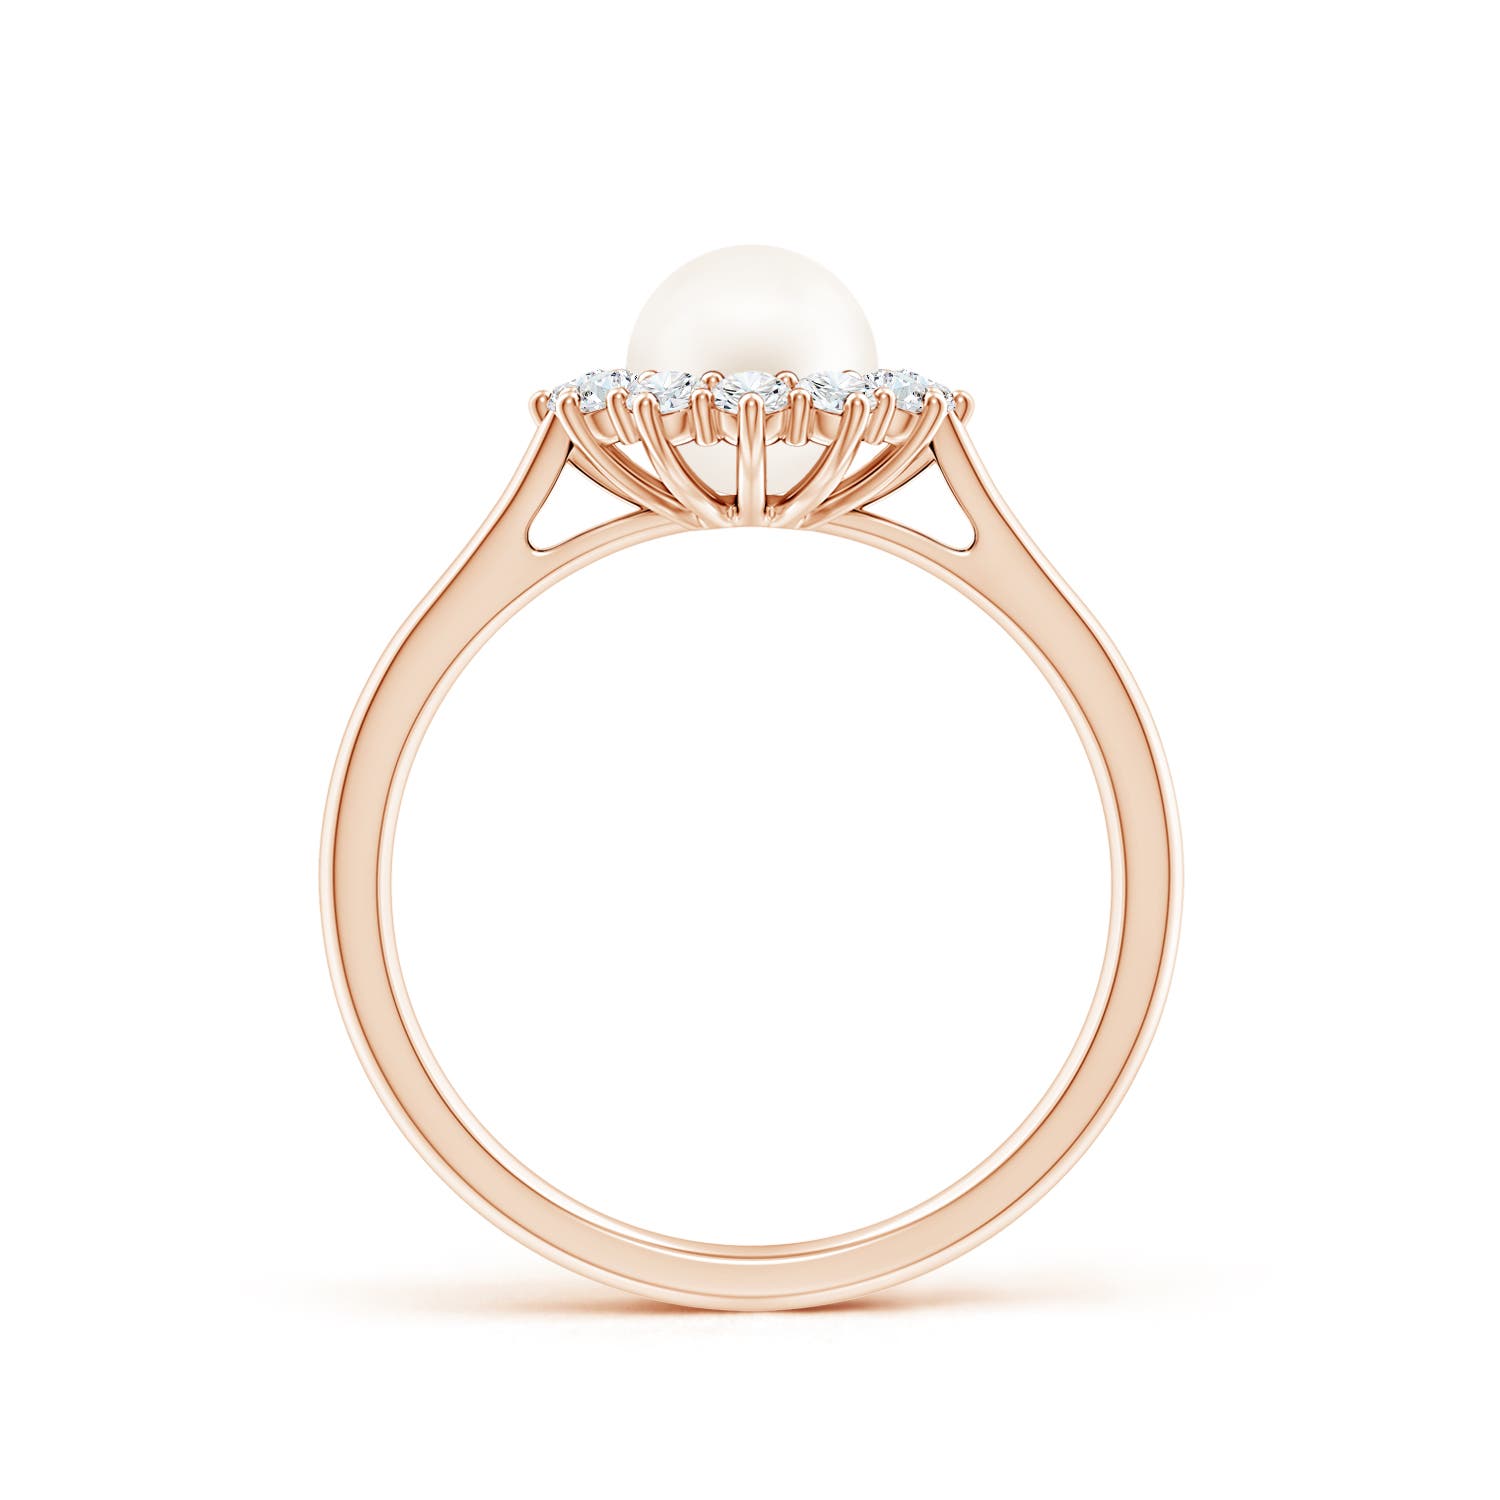 AA / 1.88 CT / 14 KT Rose Gold